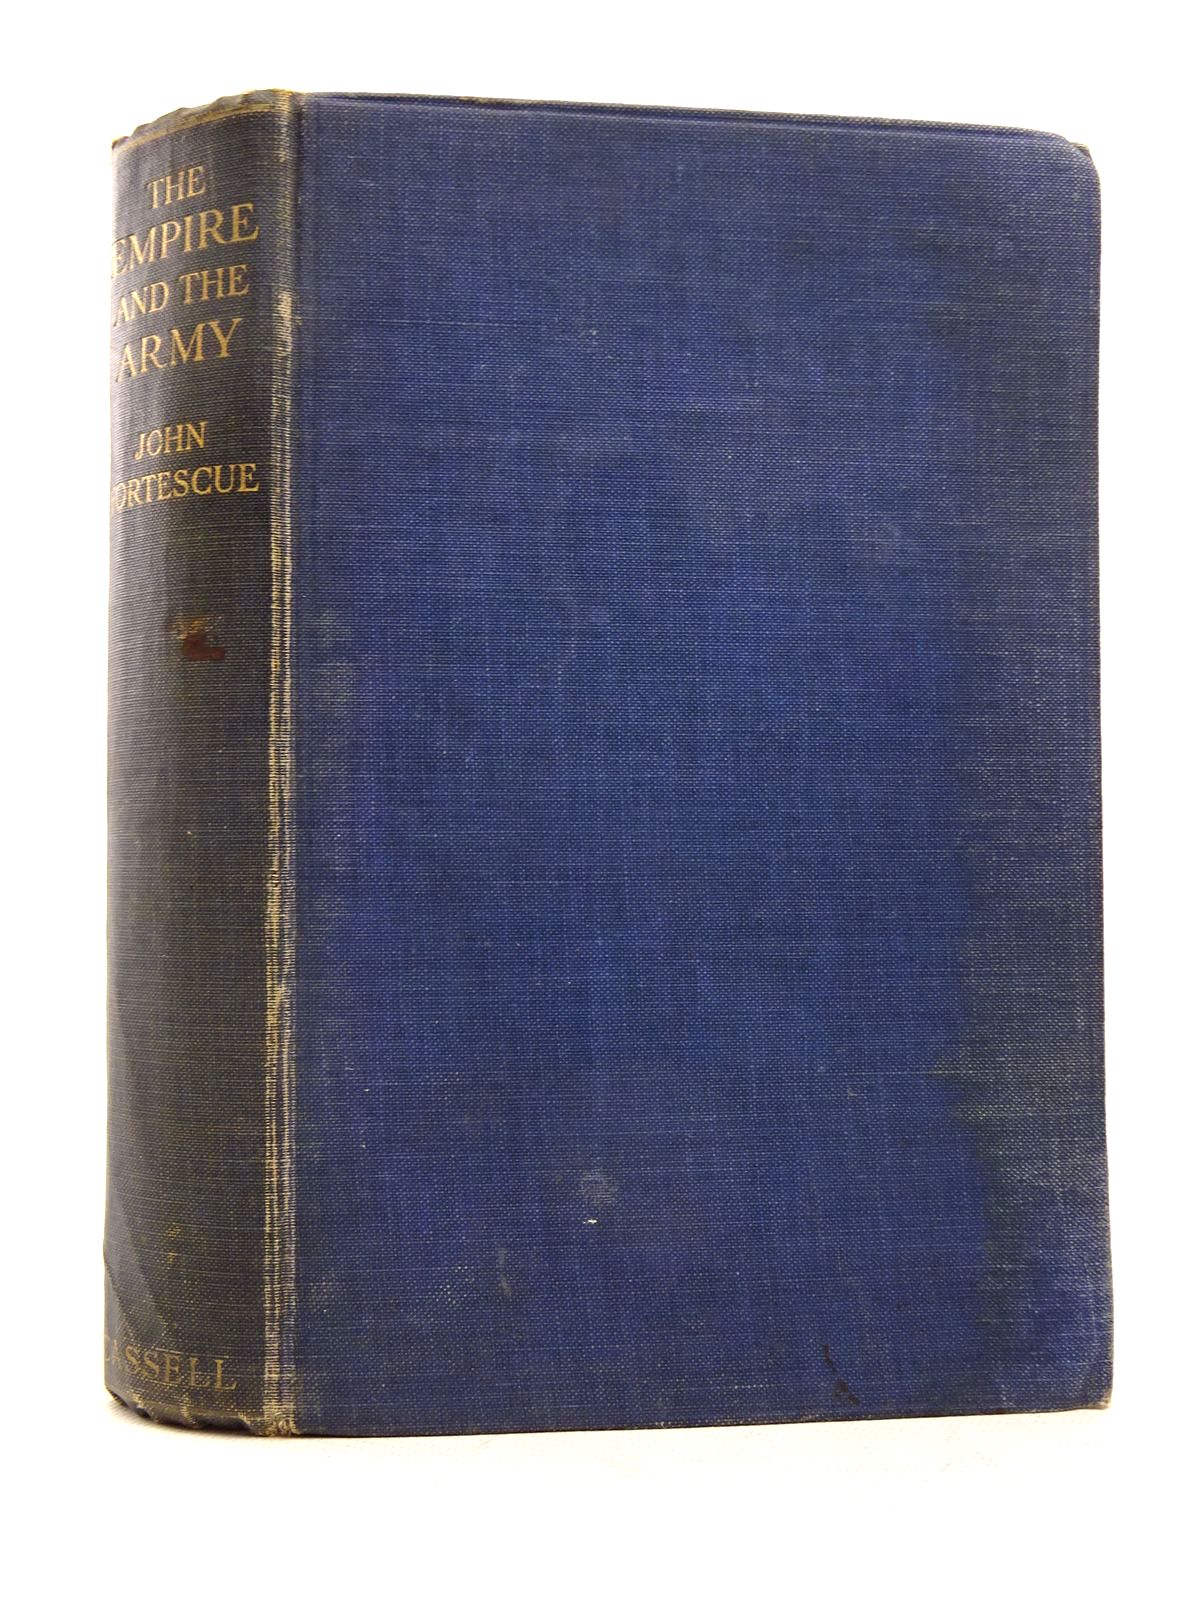 Photo of THE EMPIRE AND THE ARMY written by Fortescue, John published by Cassell & Company Ltd (STOCK CODE: 1817192)  for sale by Stella & Rose's Books